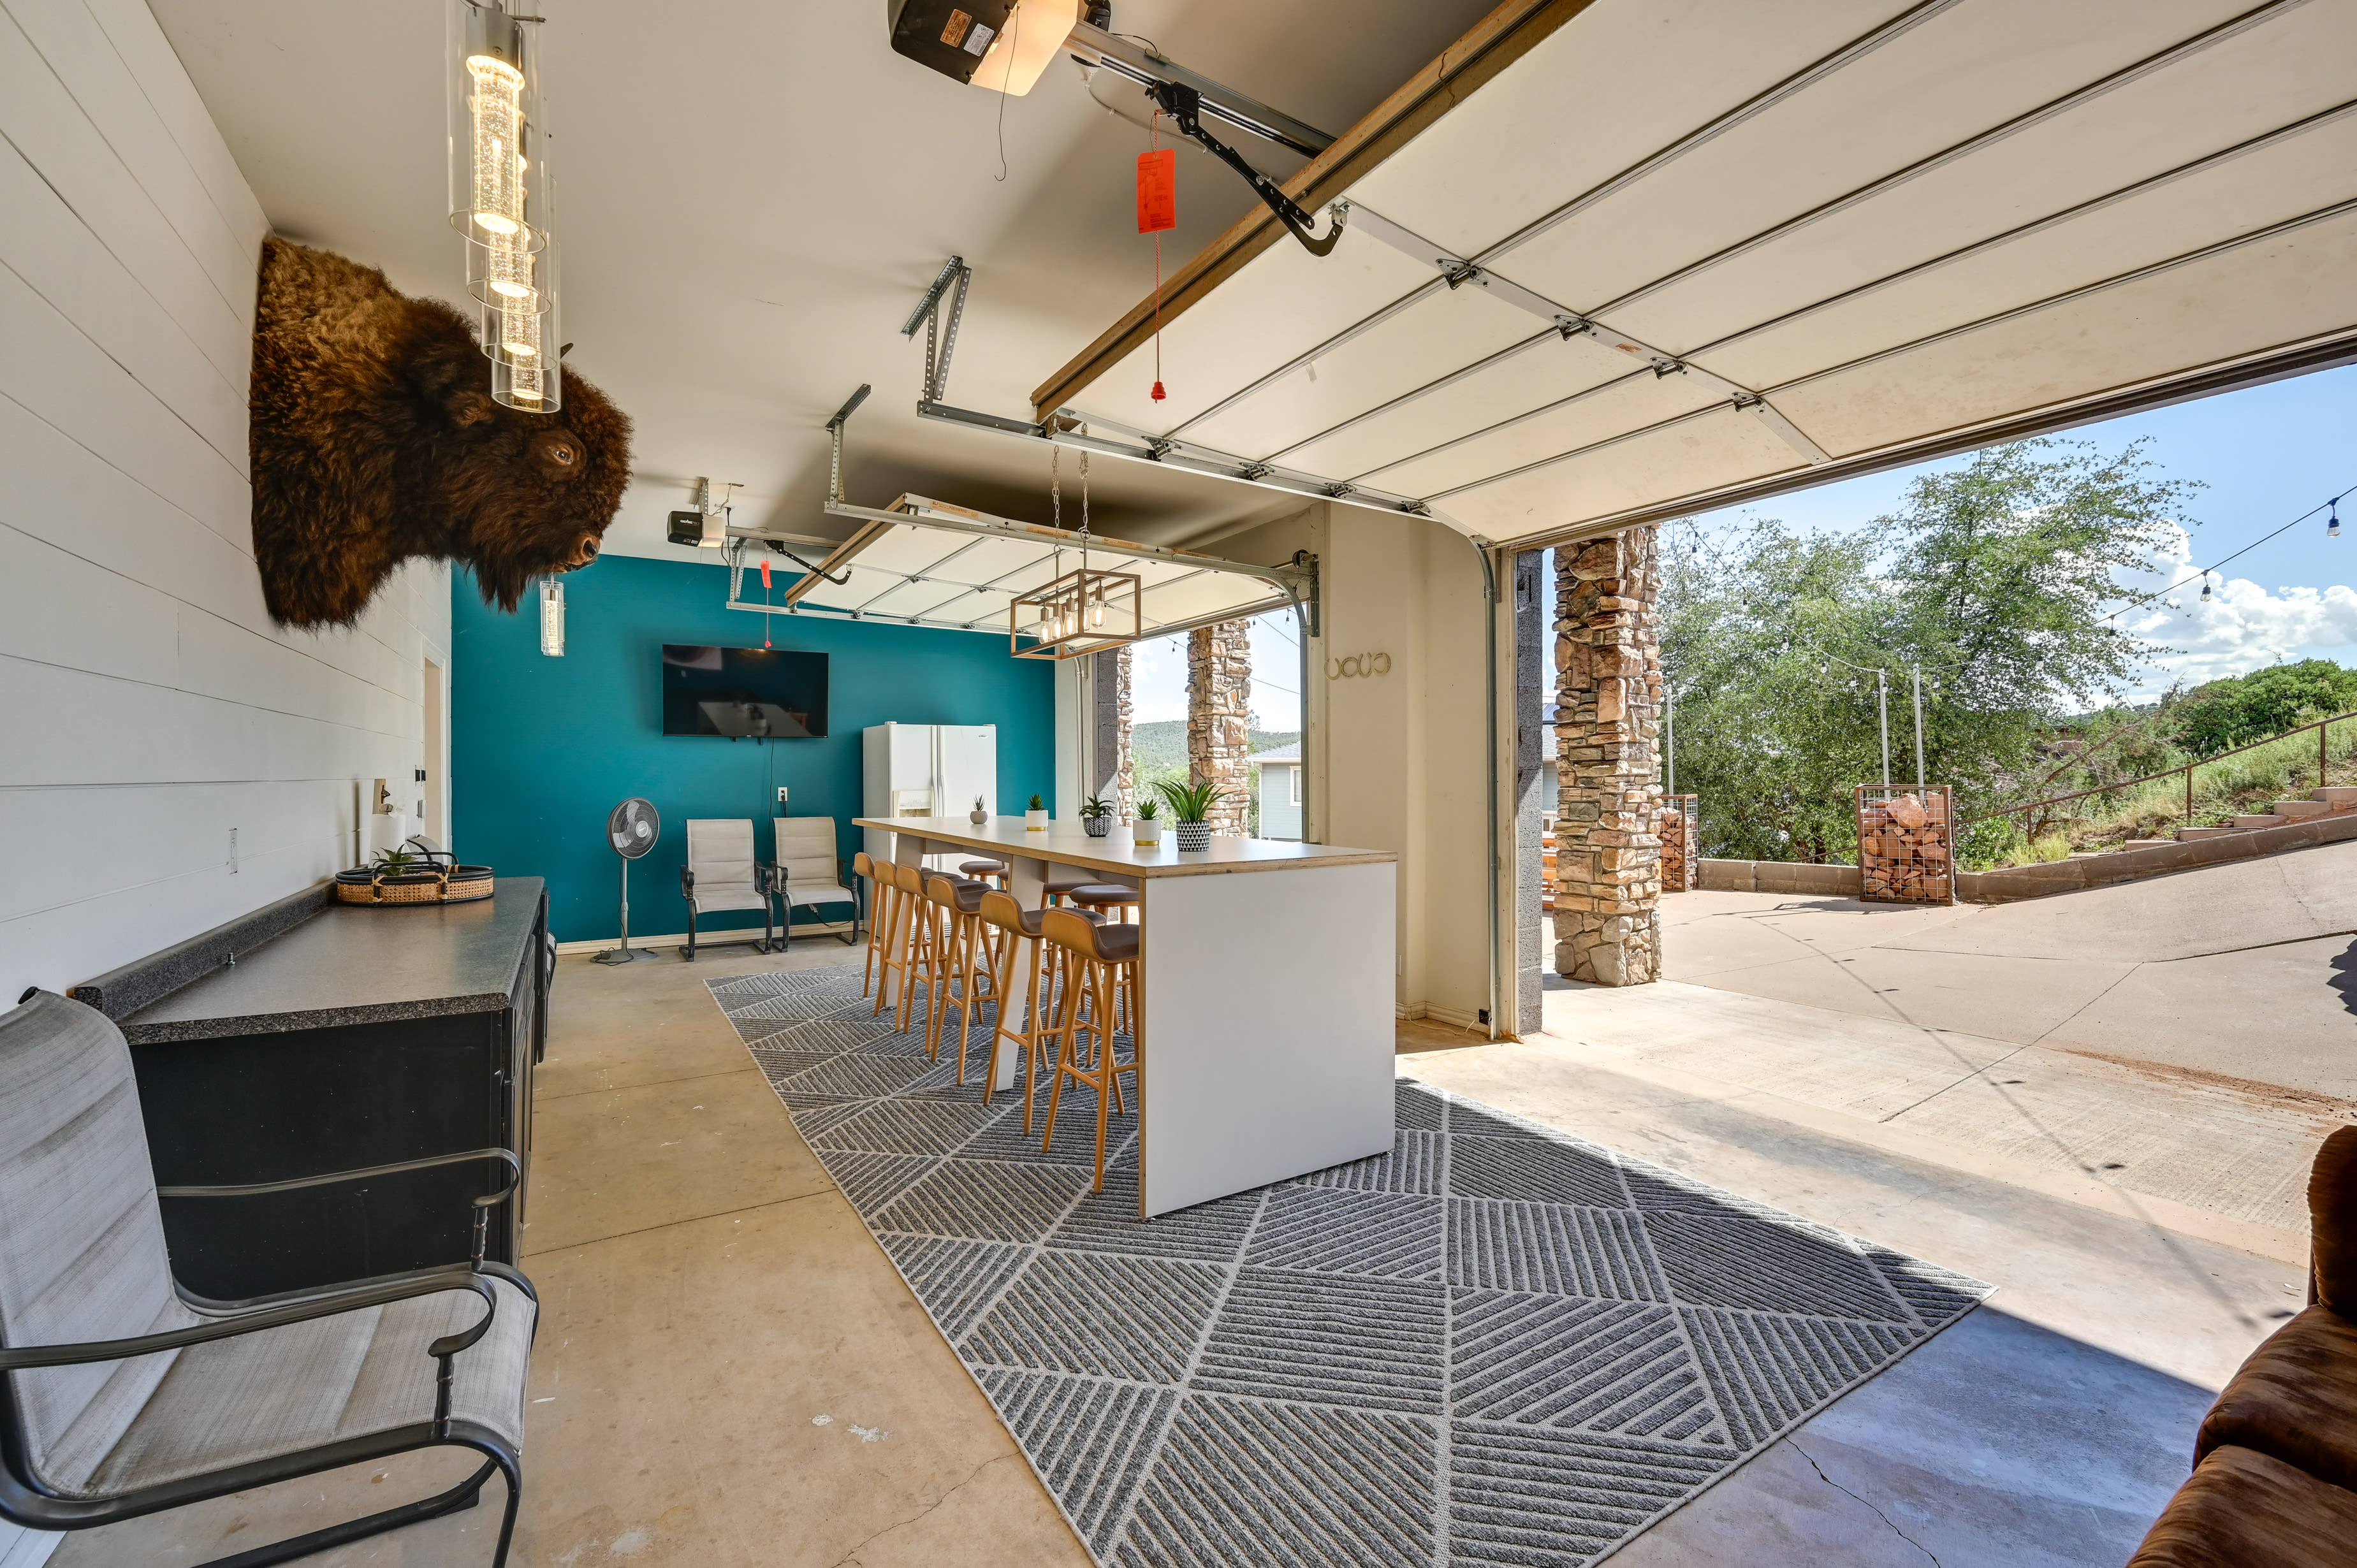 Outdoor Dining Area | Mountain Views | Hiking Trail Access On-Site